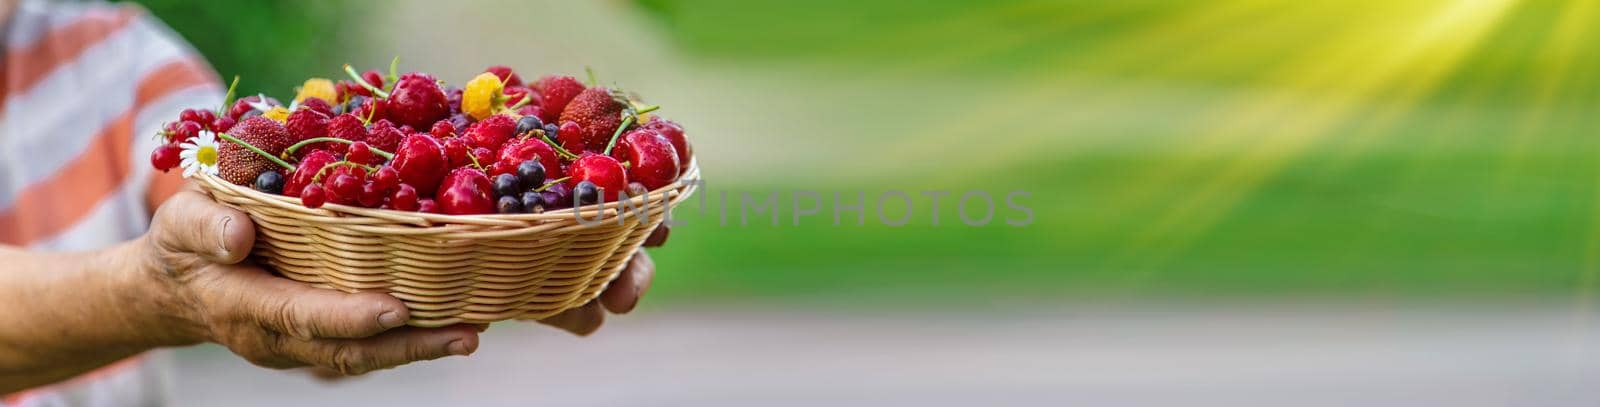 Grandmother holds a harvest of berries in her hands. Selective focus. Food.